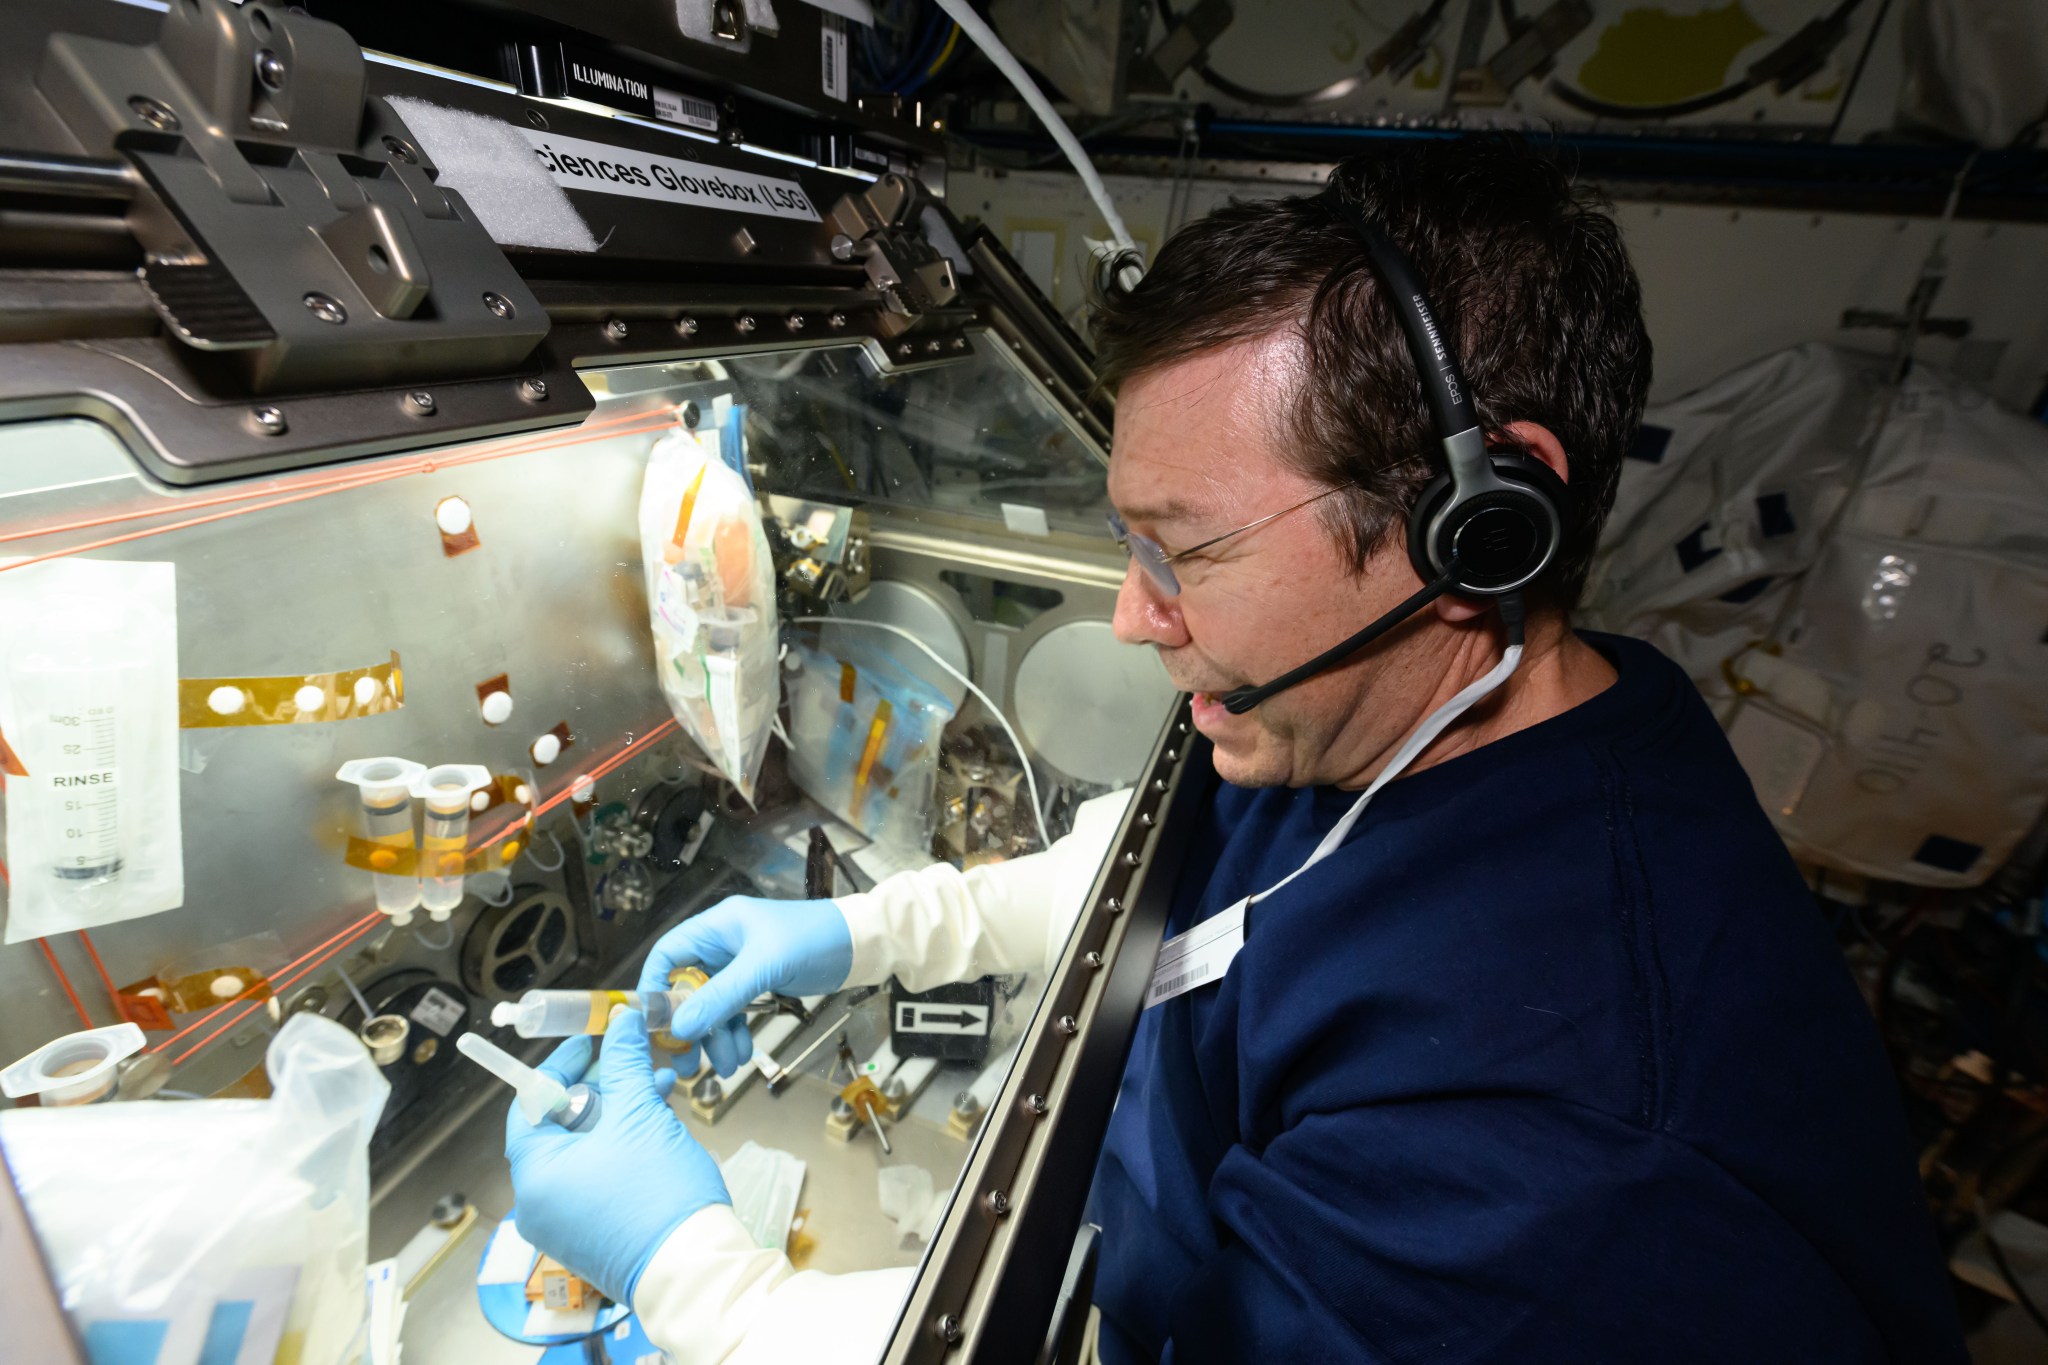 A male astronaut is looking into a glass glovebox as he works on a science experiment. Inside the glovebox there is various scientific equipment including several syringes and bags. The astronaut is holding two syringes inside the glovebox.